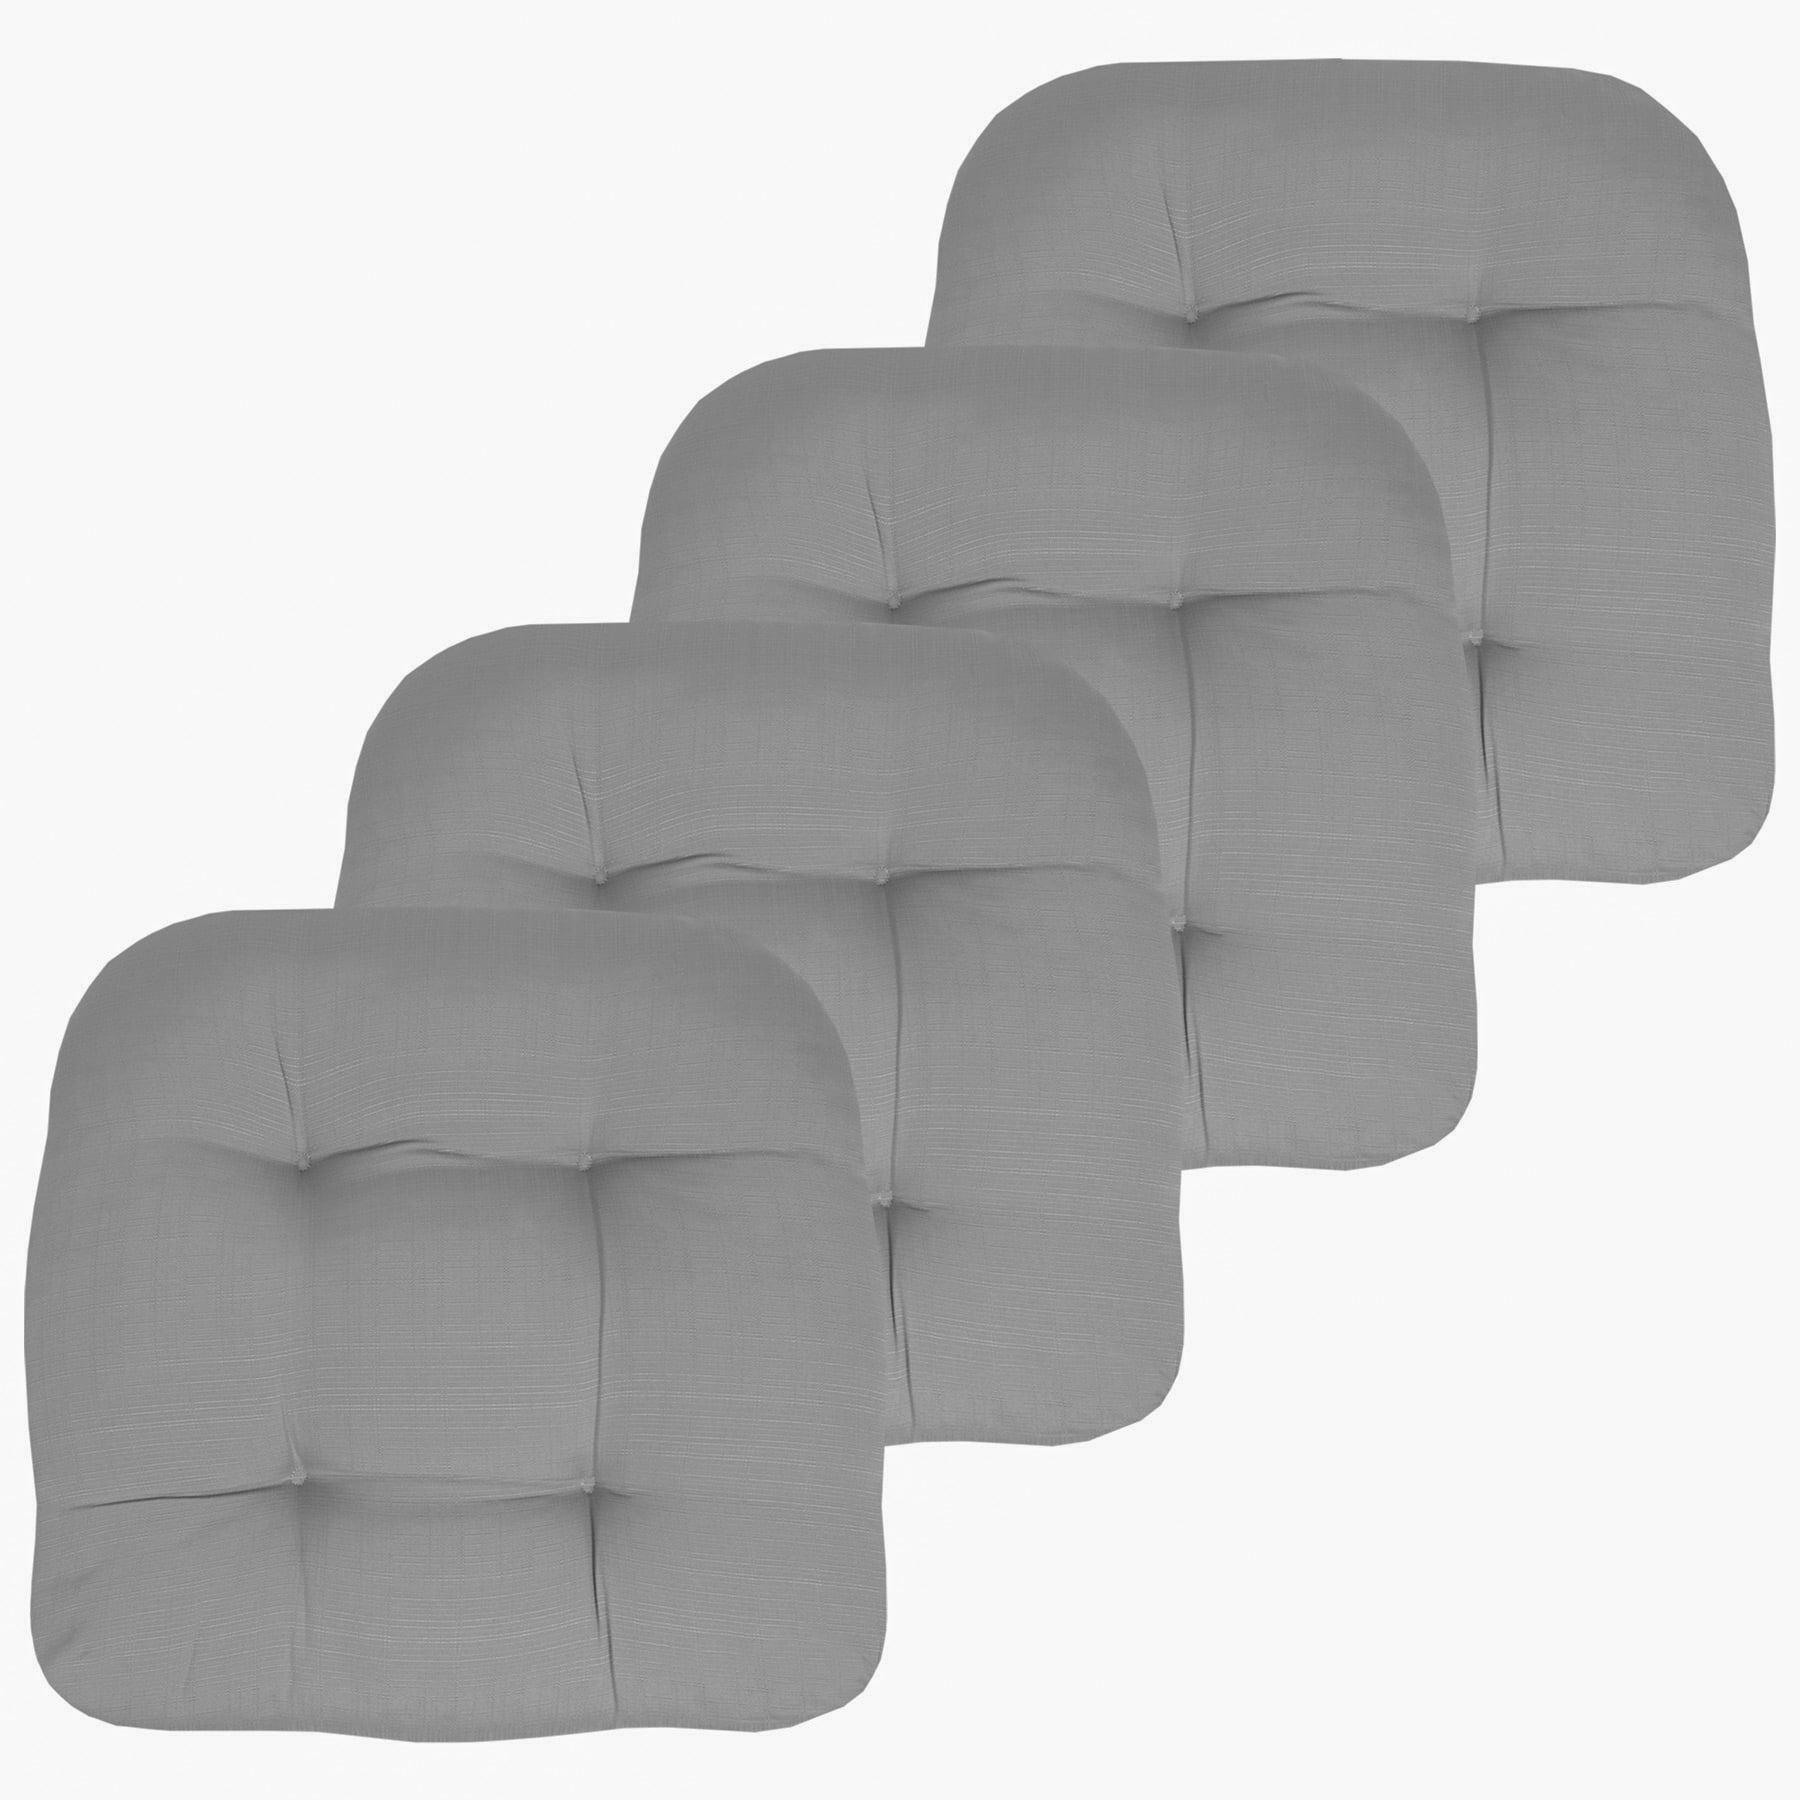 RACE LEAF Chair Cushions 19 x 19 Patio Chair Seat Pads, Set of 2 Thick  Fill Tufted Square Patio Cushions, Water-Resistant with Ties for Non-Slip